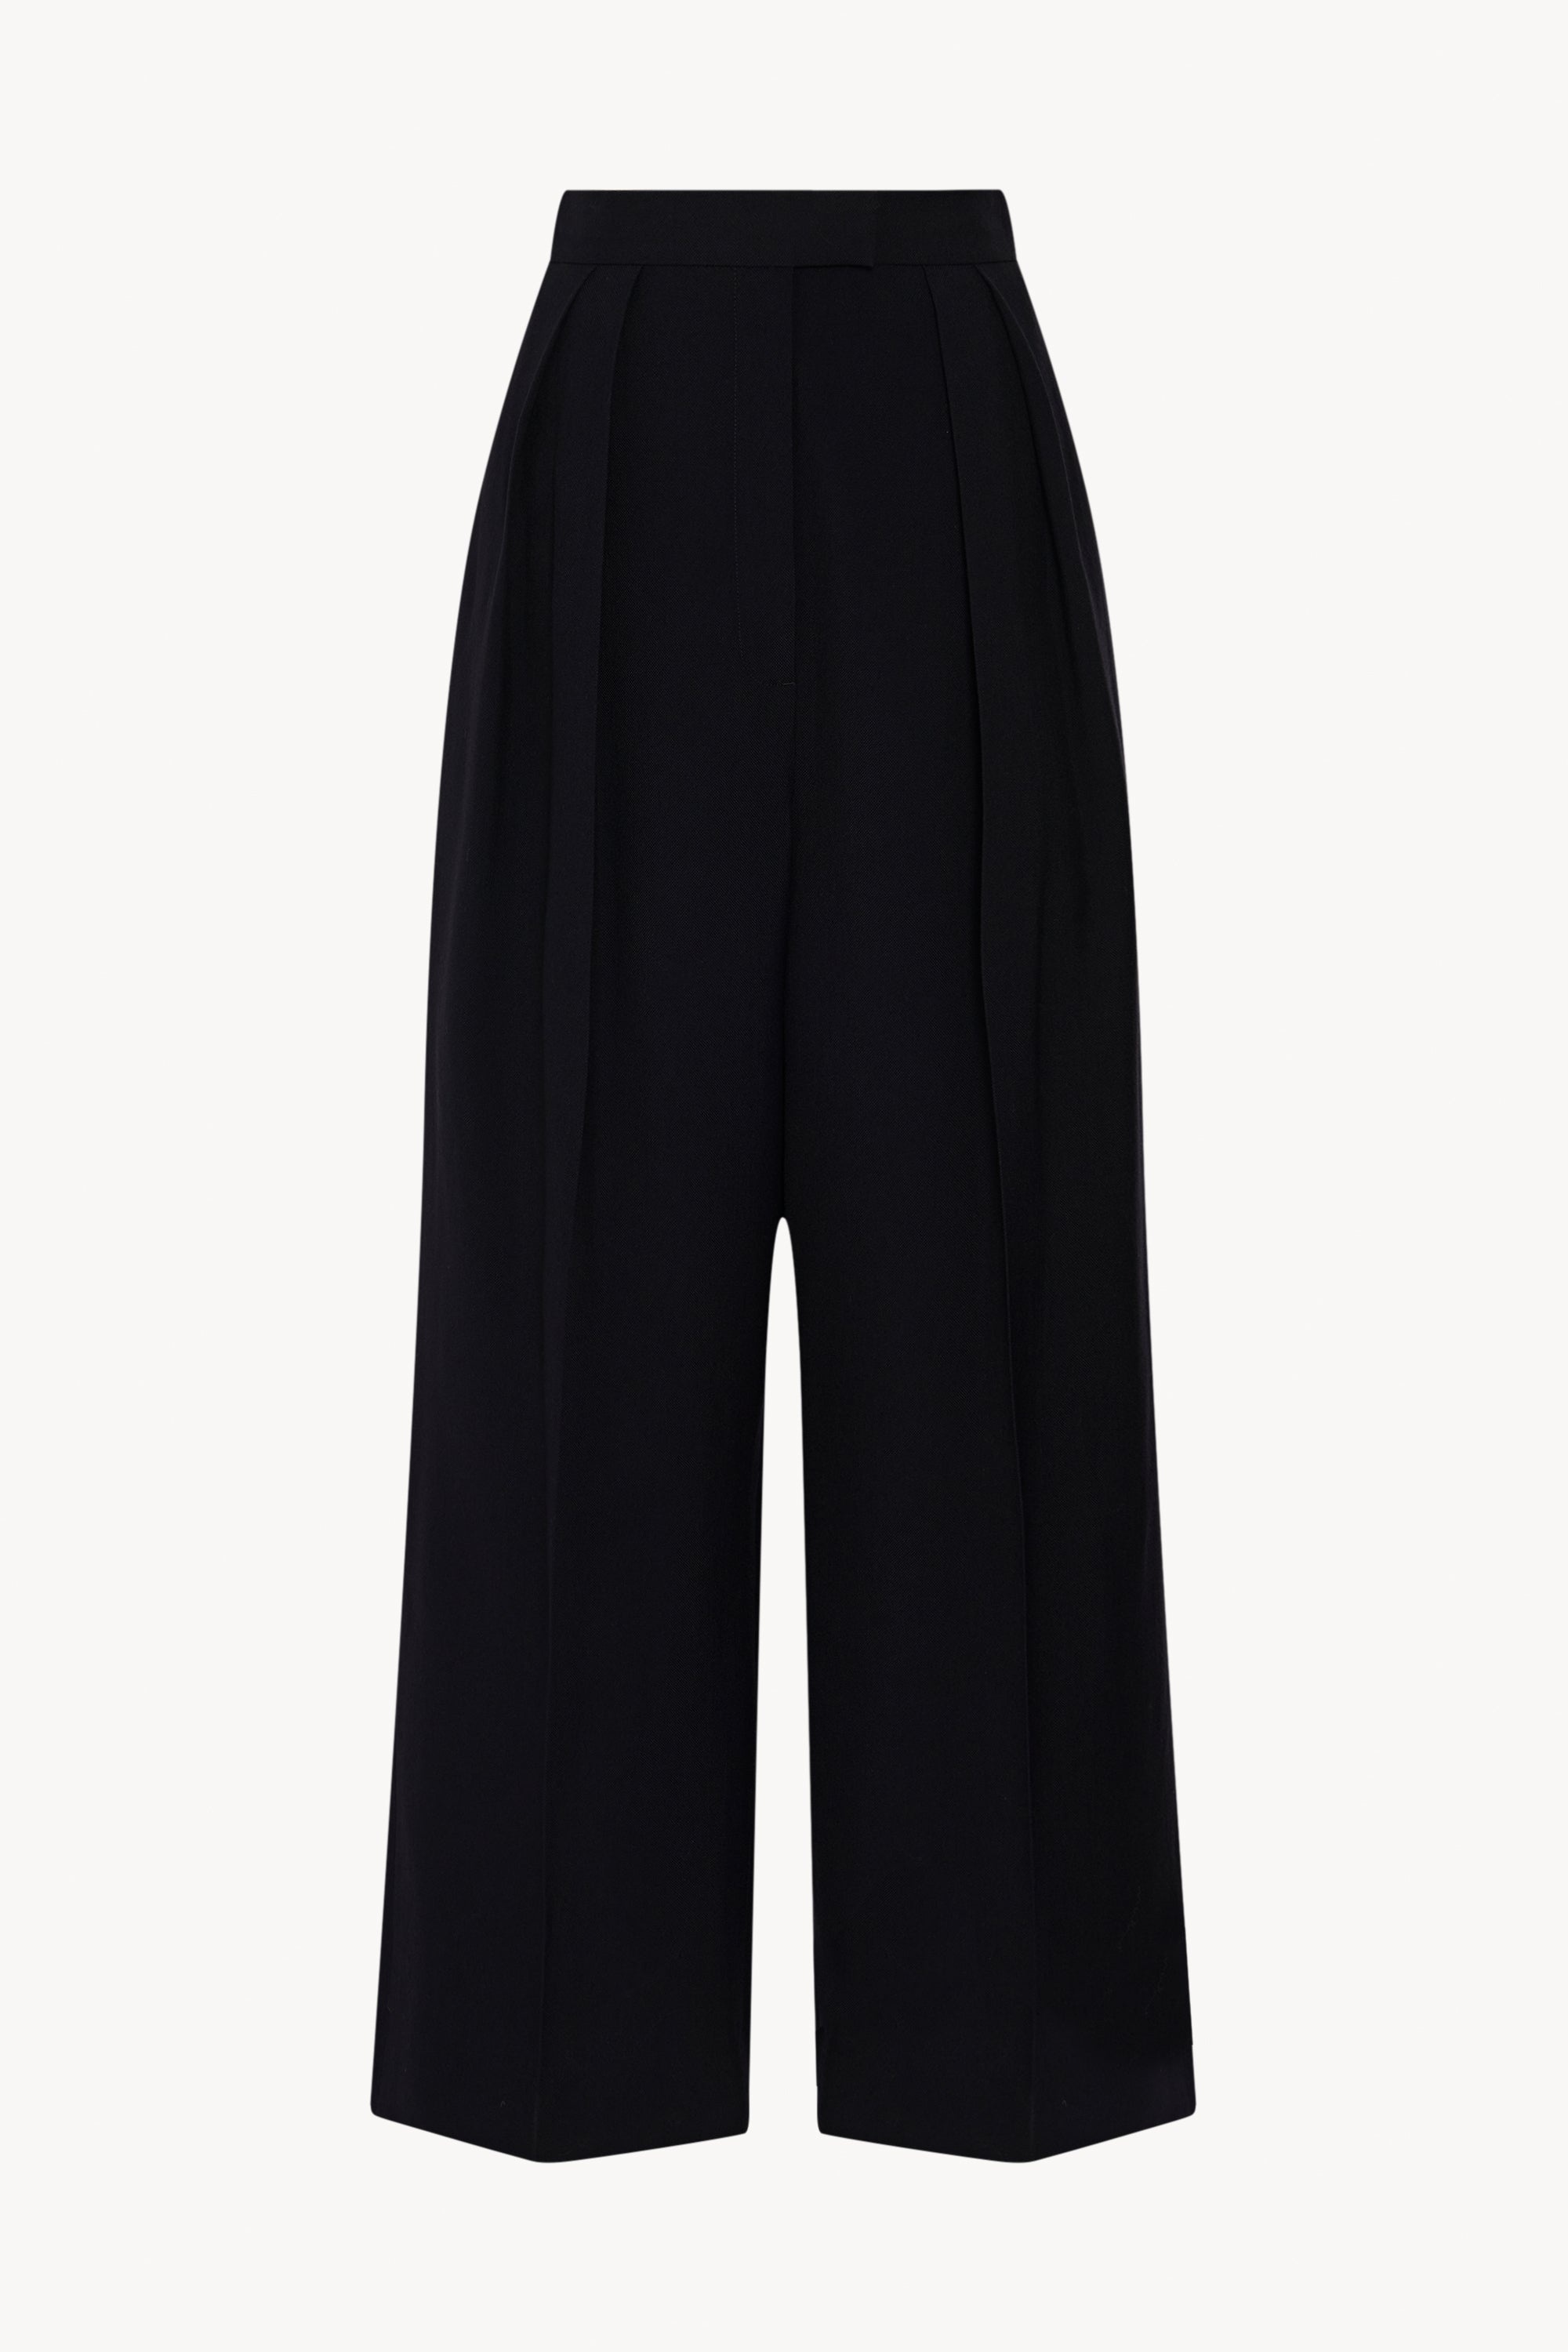 Crissi Pant in Viscose and Virgin Wool - 1